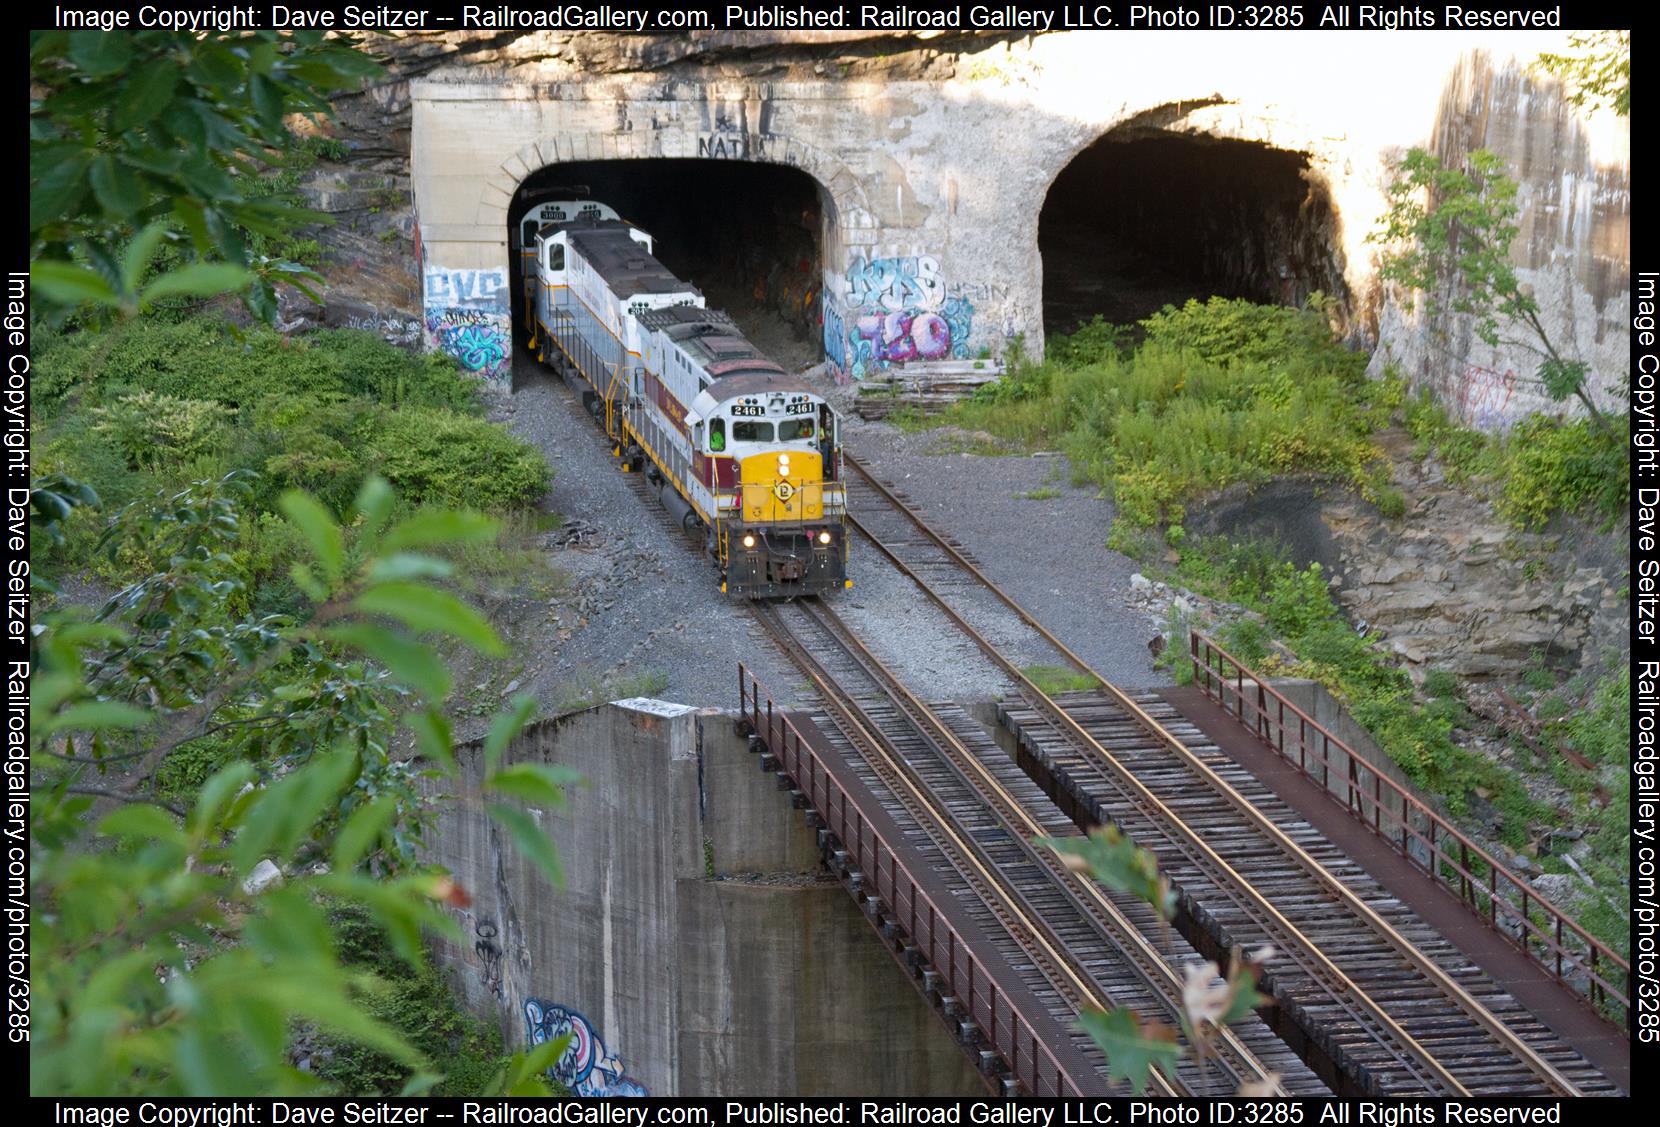 DL 2461 is a class C425 and  is pictured in Scranton, Pennsylvania, United States.  This was taken along the Pocono Main on the Delaare-Lackawanna. Photo Copyright: Dave Seitzer uploaded to Railroad Gallery on 04/12/2024. This photograph of DL 2461 was taken on Friday, August 12, 2022. All Rights Reserved. 